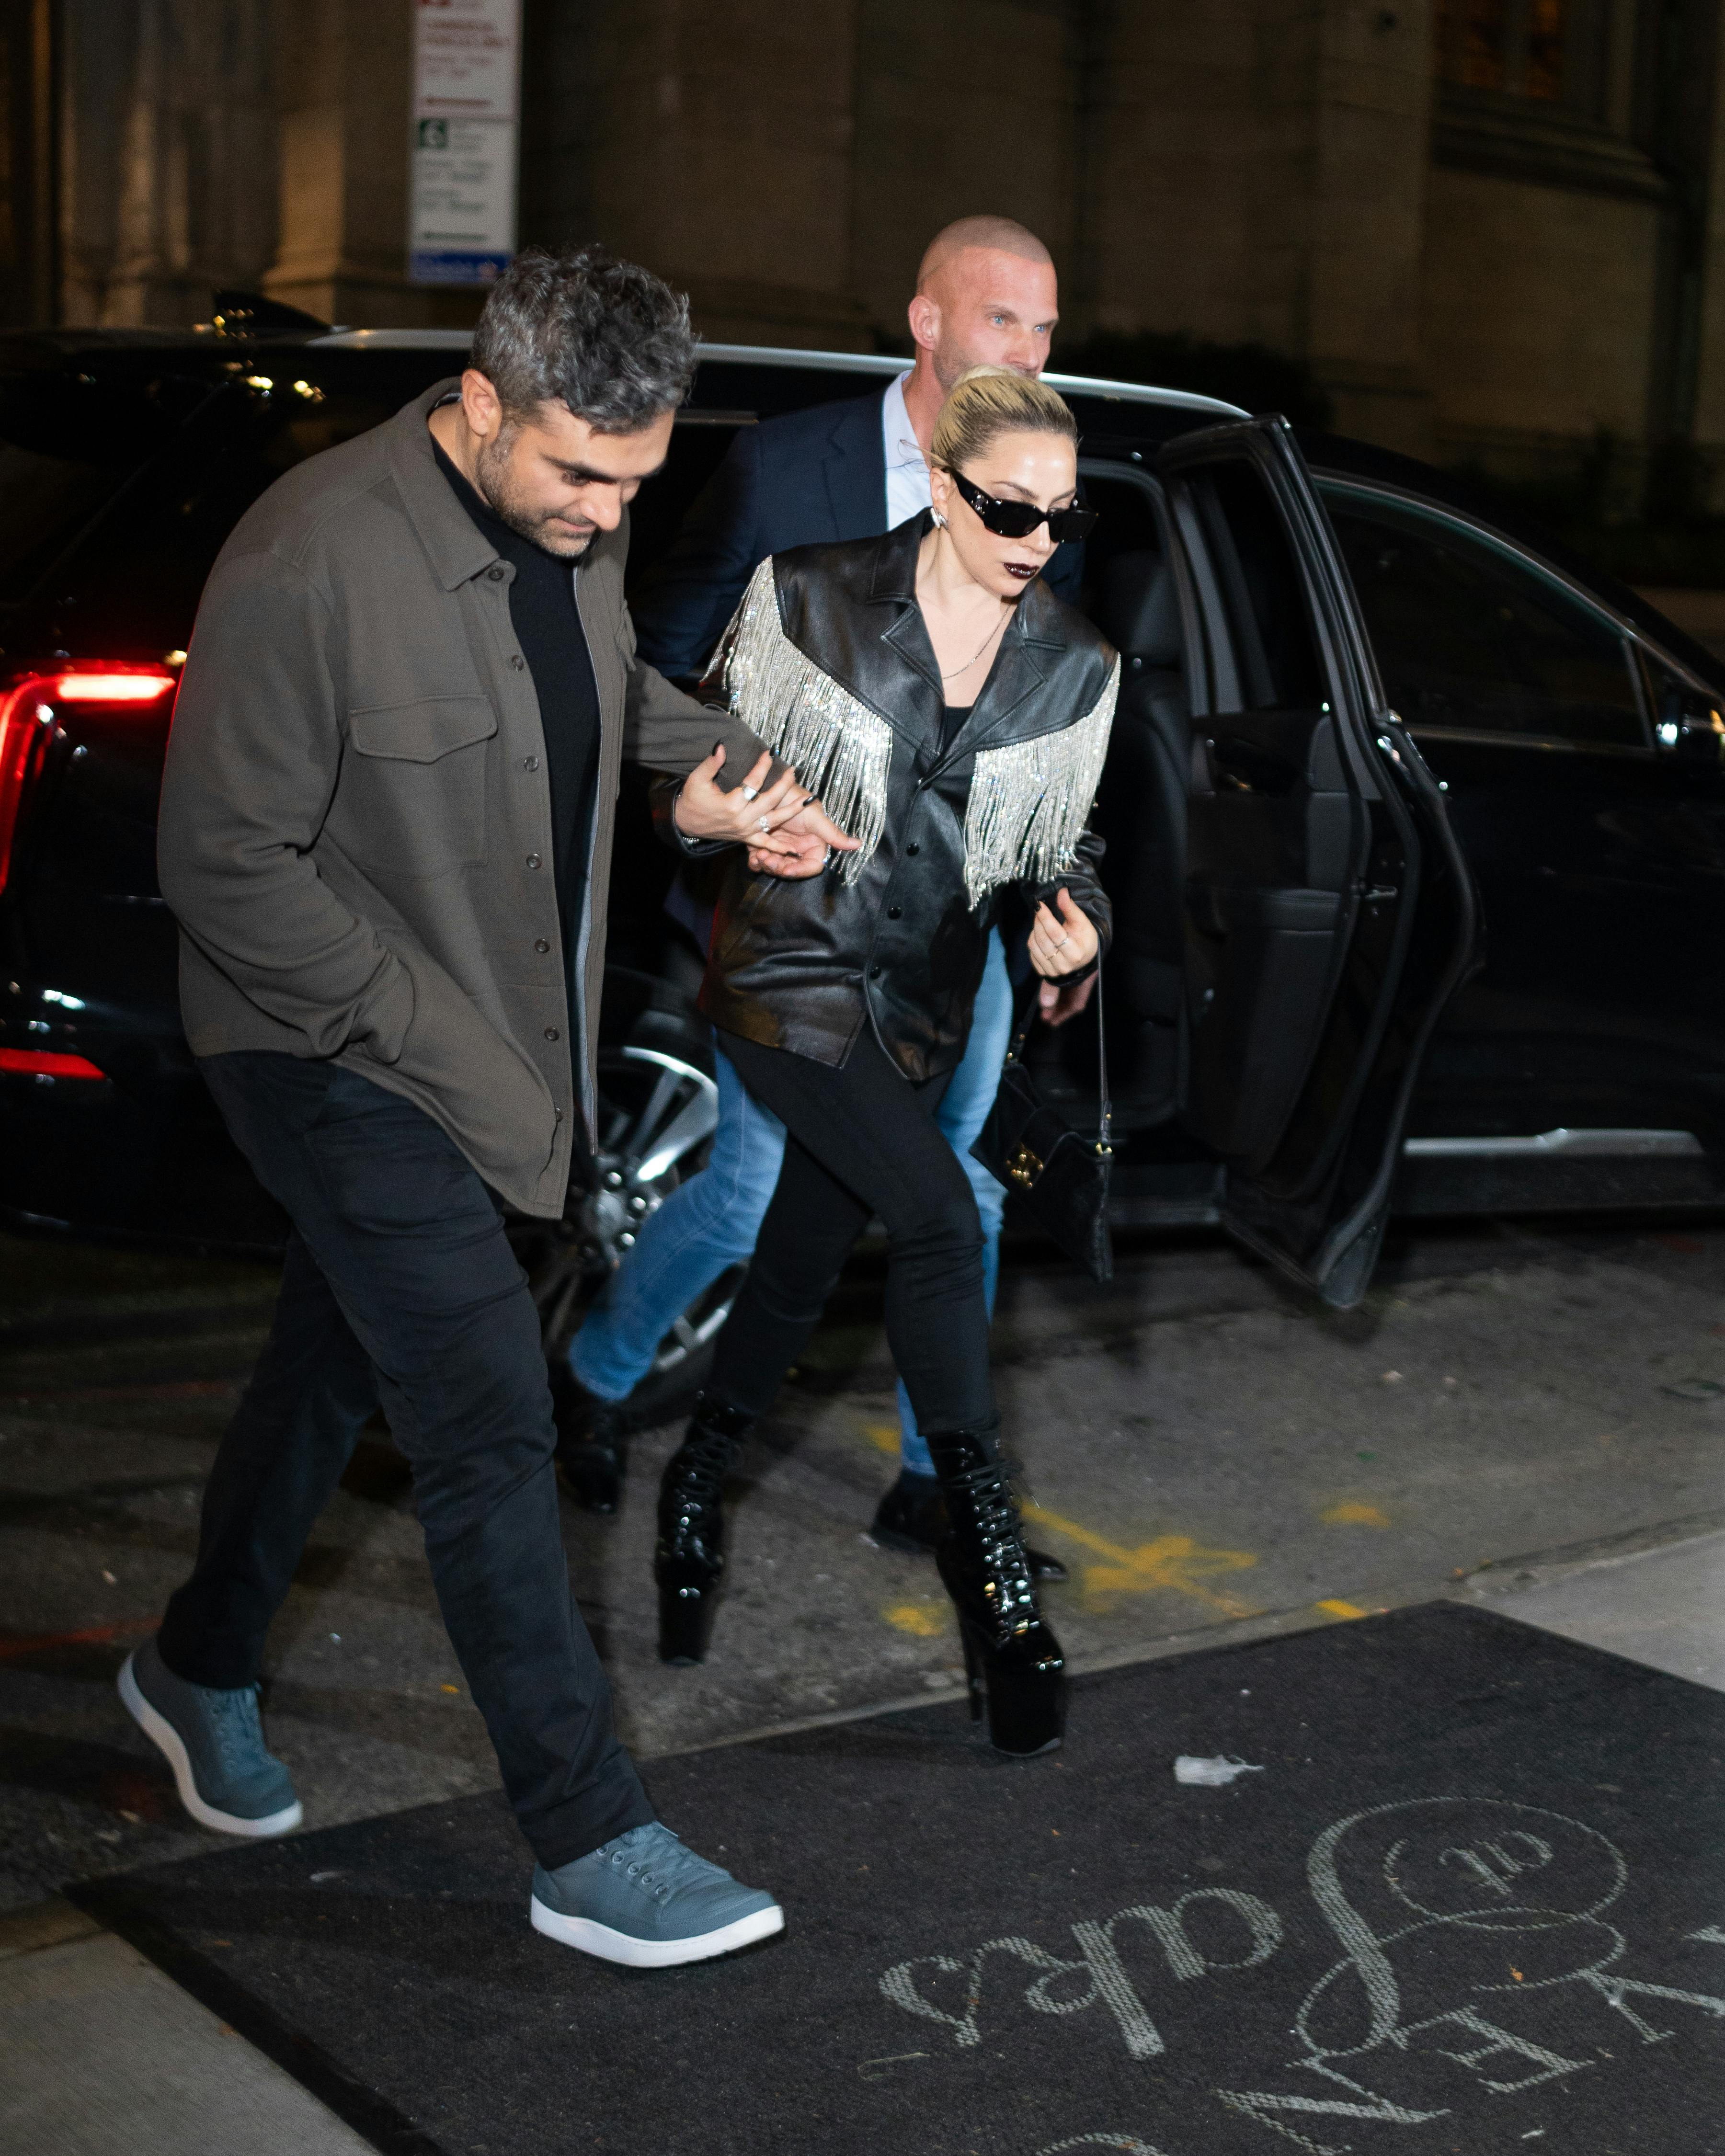 Lady Gaga spotted in new york arriving to snl after party with boyfriend. Pictured: Lady Gaga Ref: SPL9975955 221023 NON-EXCLUSIVE Picture by: STARTHESTAR / SplashNews.com Splash News and Pictures USA: 310-525-5808 UK: 020 8126 1009 eamteam@shutterstock.com World Rights, 